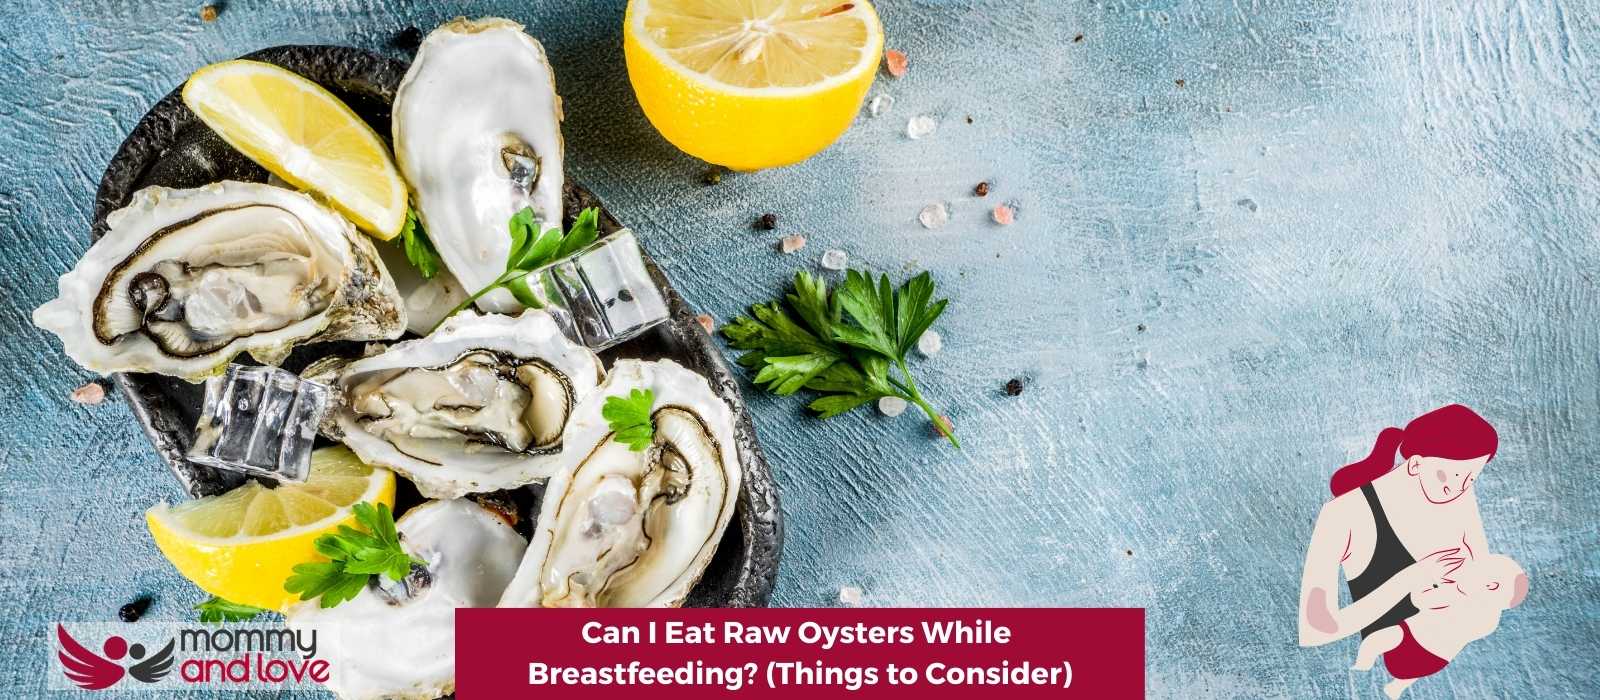 Can I Eat Raw Oysters While Breastfeeding (Things to Consider)